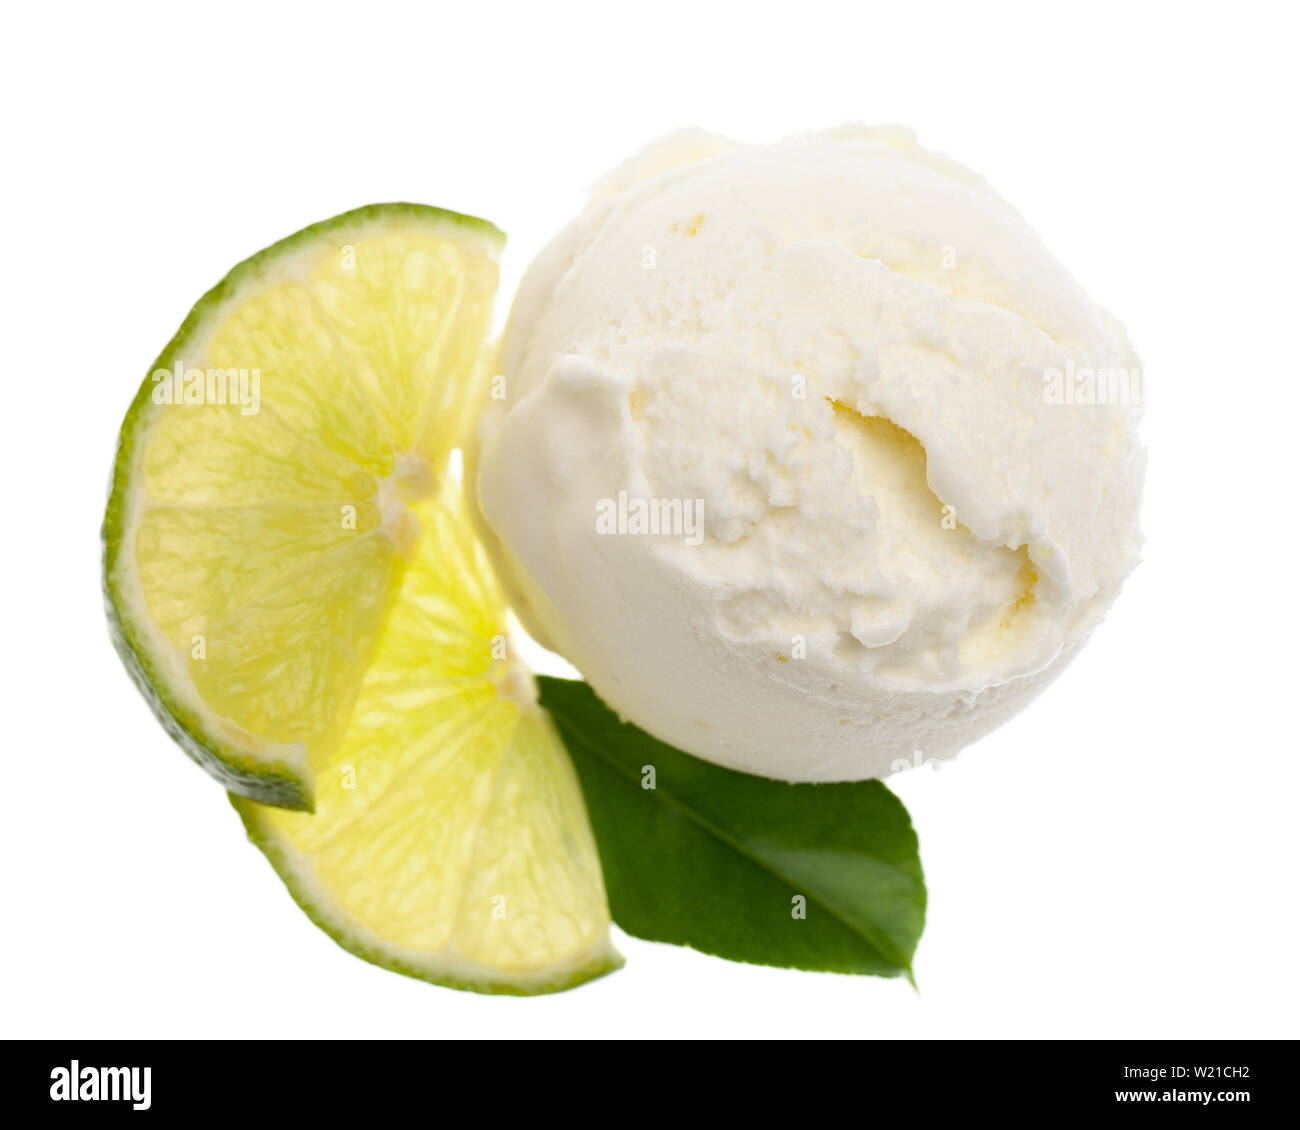 bird´s eye view of lemon ice cream scoop with slices of lemon and a single lemon leaf isolated on white background Stock Photo